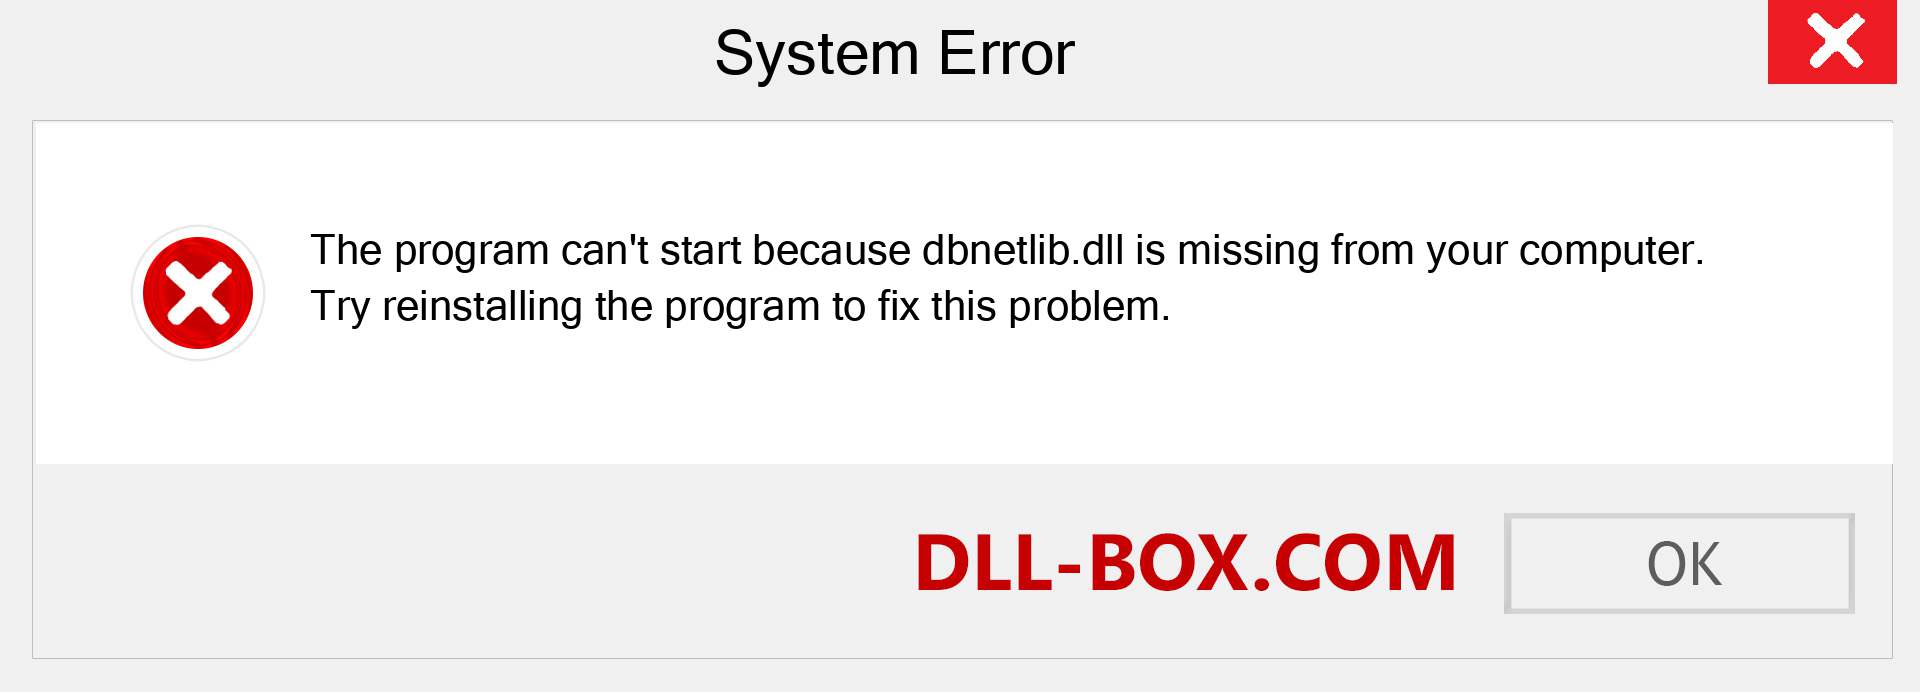  dbnetlib.dll file is missing?. Download for Windows 7, 8, 10 - Fix  dbnetlib dll Missing Error on Windows, photos, images